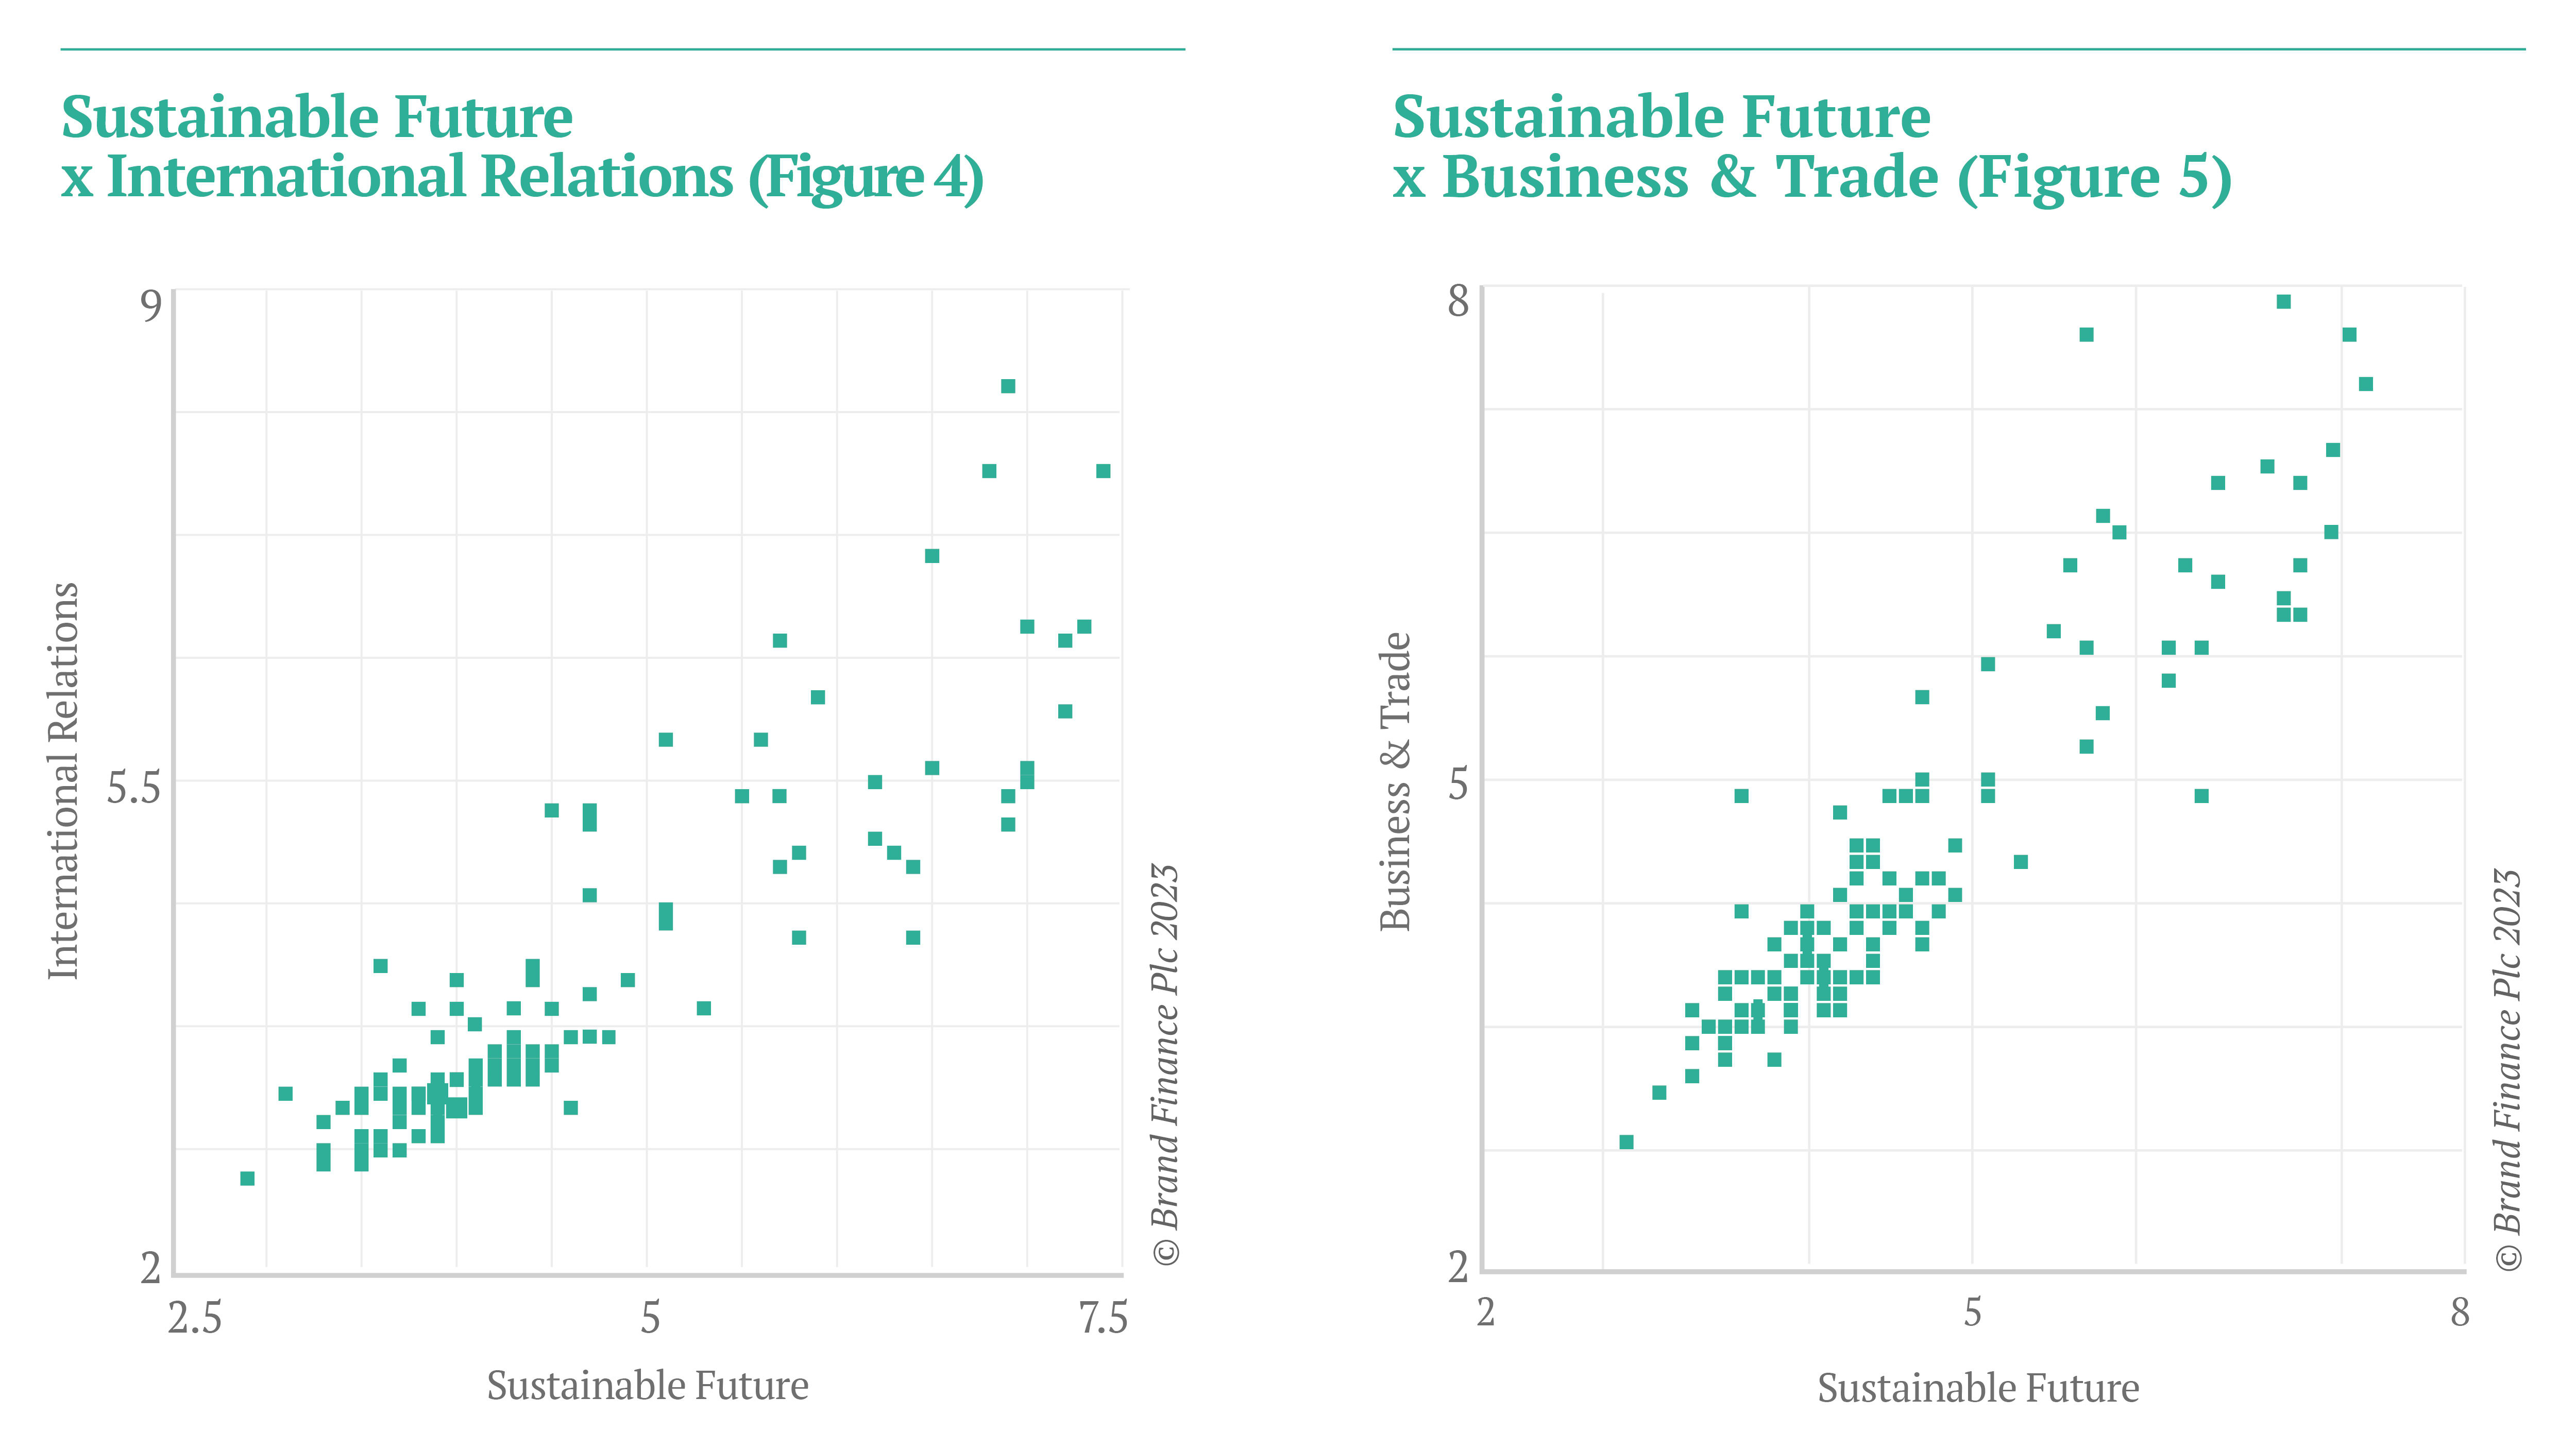 Figure 4 shows the positive correlation between 'sustainable futures' and 'international relations' and figure 5 shows the postive correlation between 'sustainable futures' and 'business and trade'.